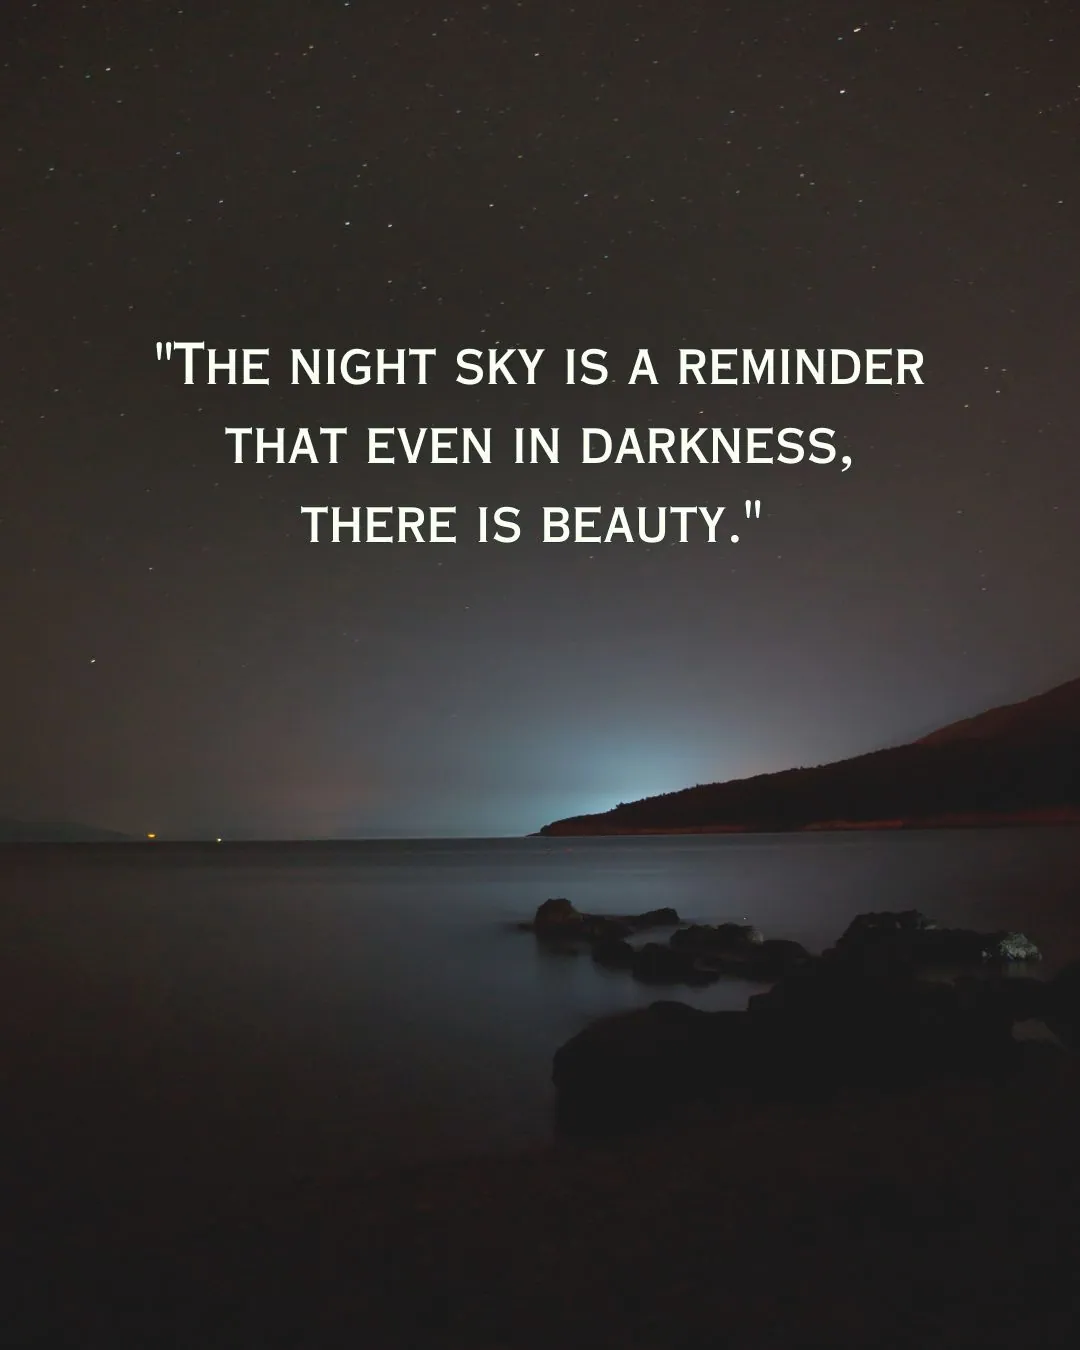 Night Sky Quotes for Instagram Image 2